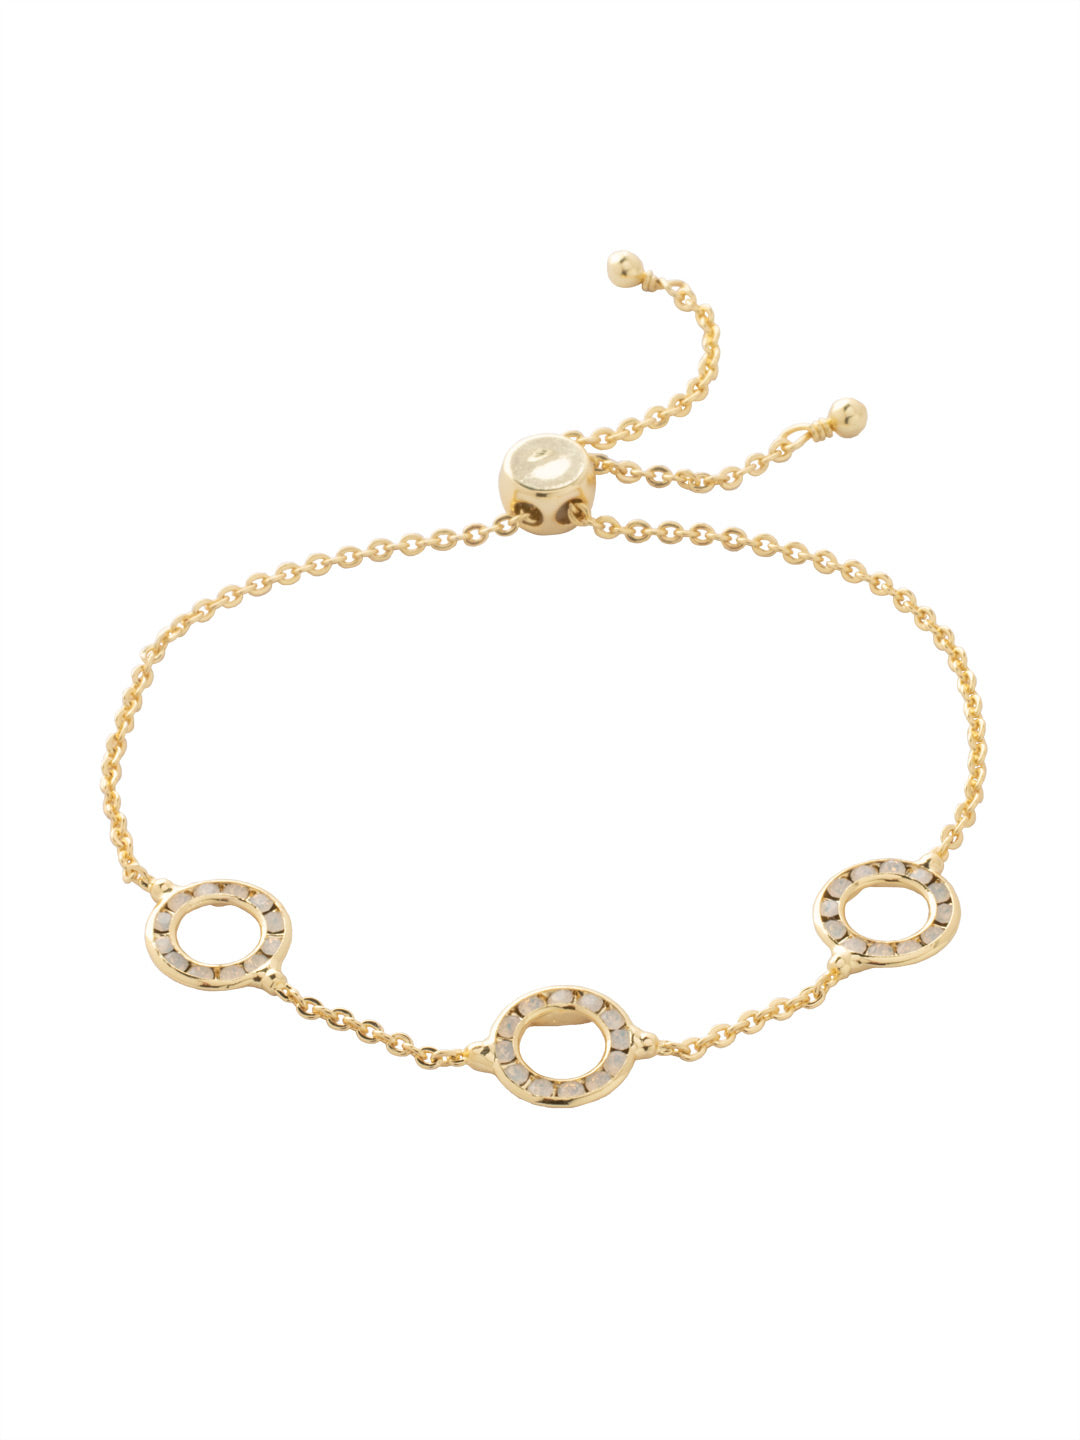 Brianna Slider Bracelet - 4BFJ7BGWO - <p>The Brianna Slider Bracelet features three round metal rings, each embellished with small crystals, and secured with an easy-to-adjust slider clasp. From Sorrelli's White Opal collection in our Bright Gold-tone finish.</p>